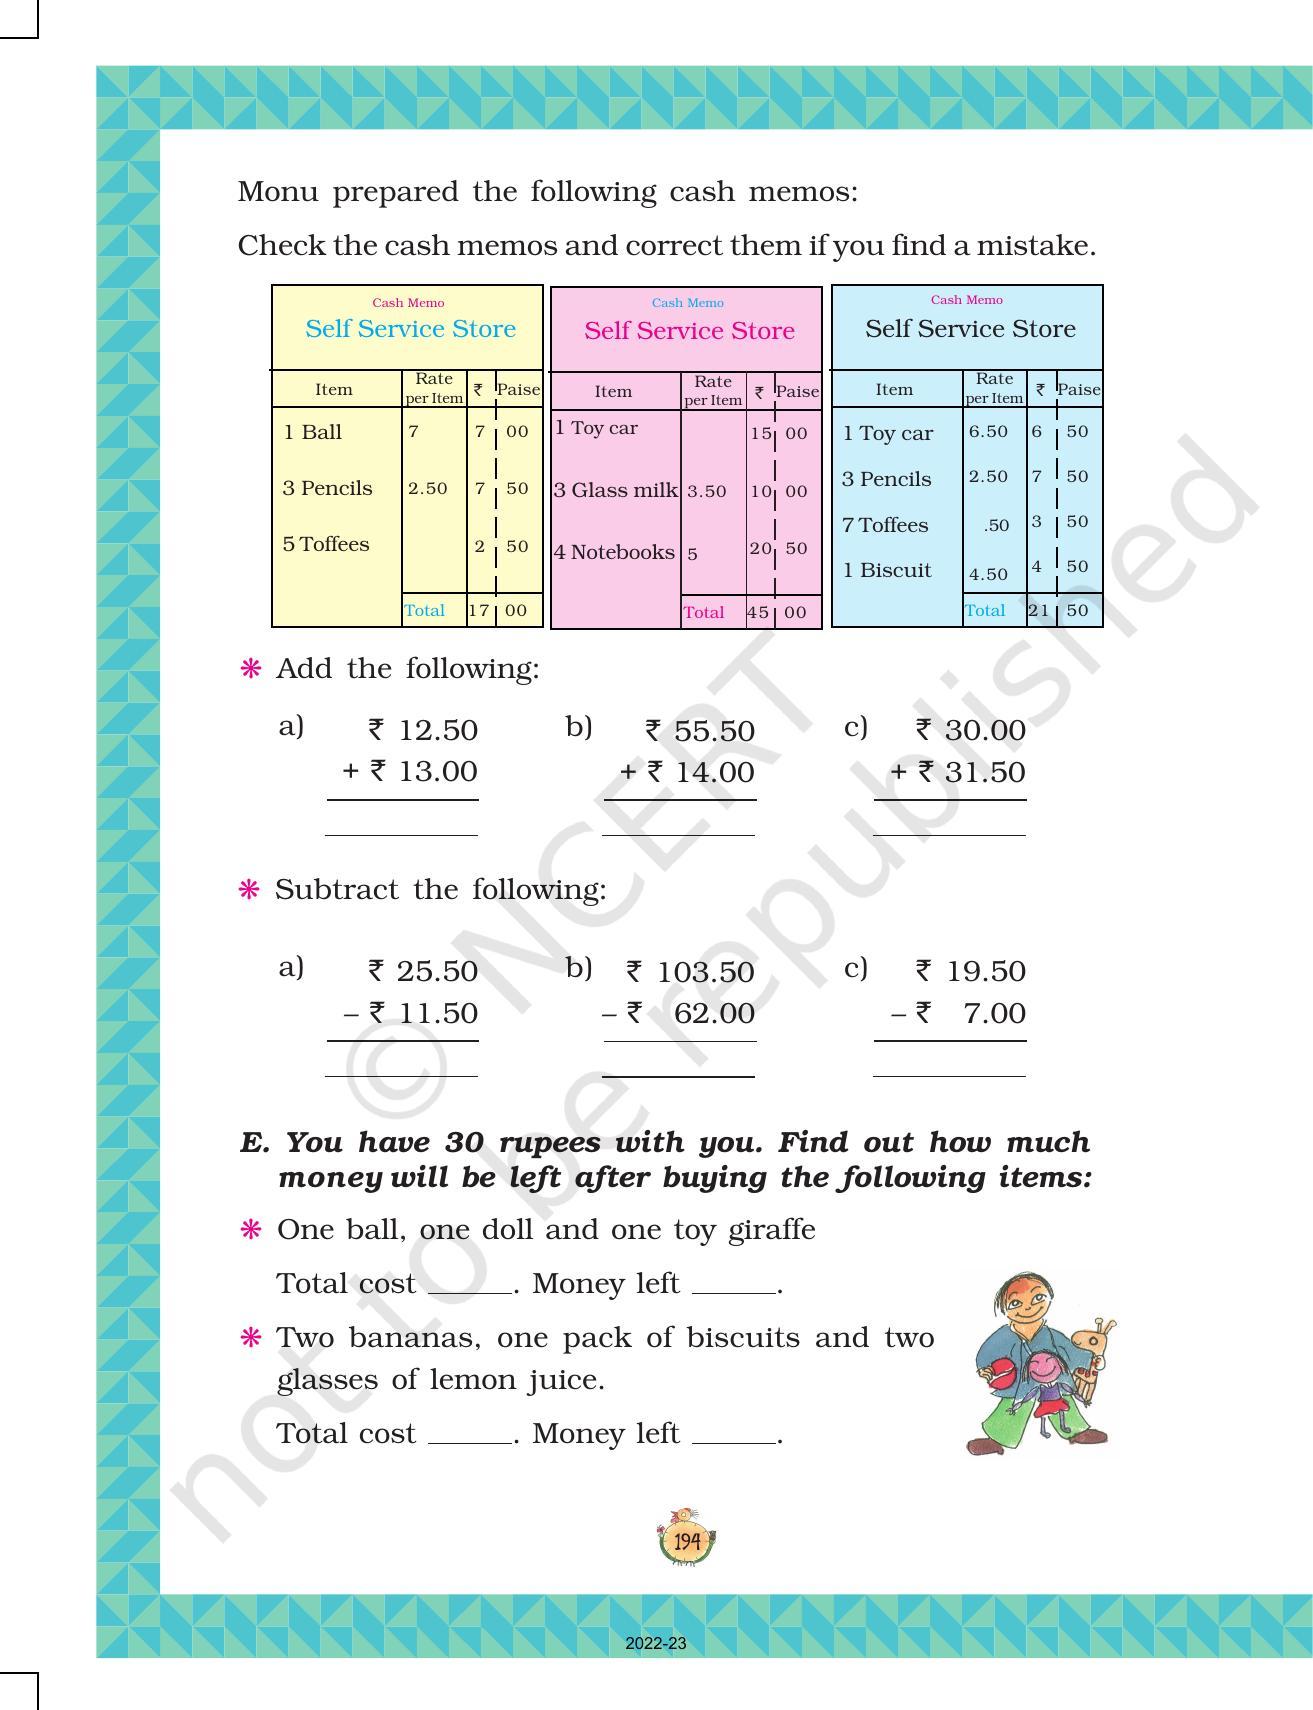 NCERT Book for Class 3 Maths Chapter 14-Rupees and Paise - Page 7